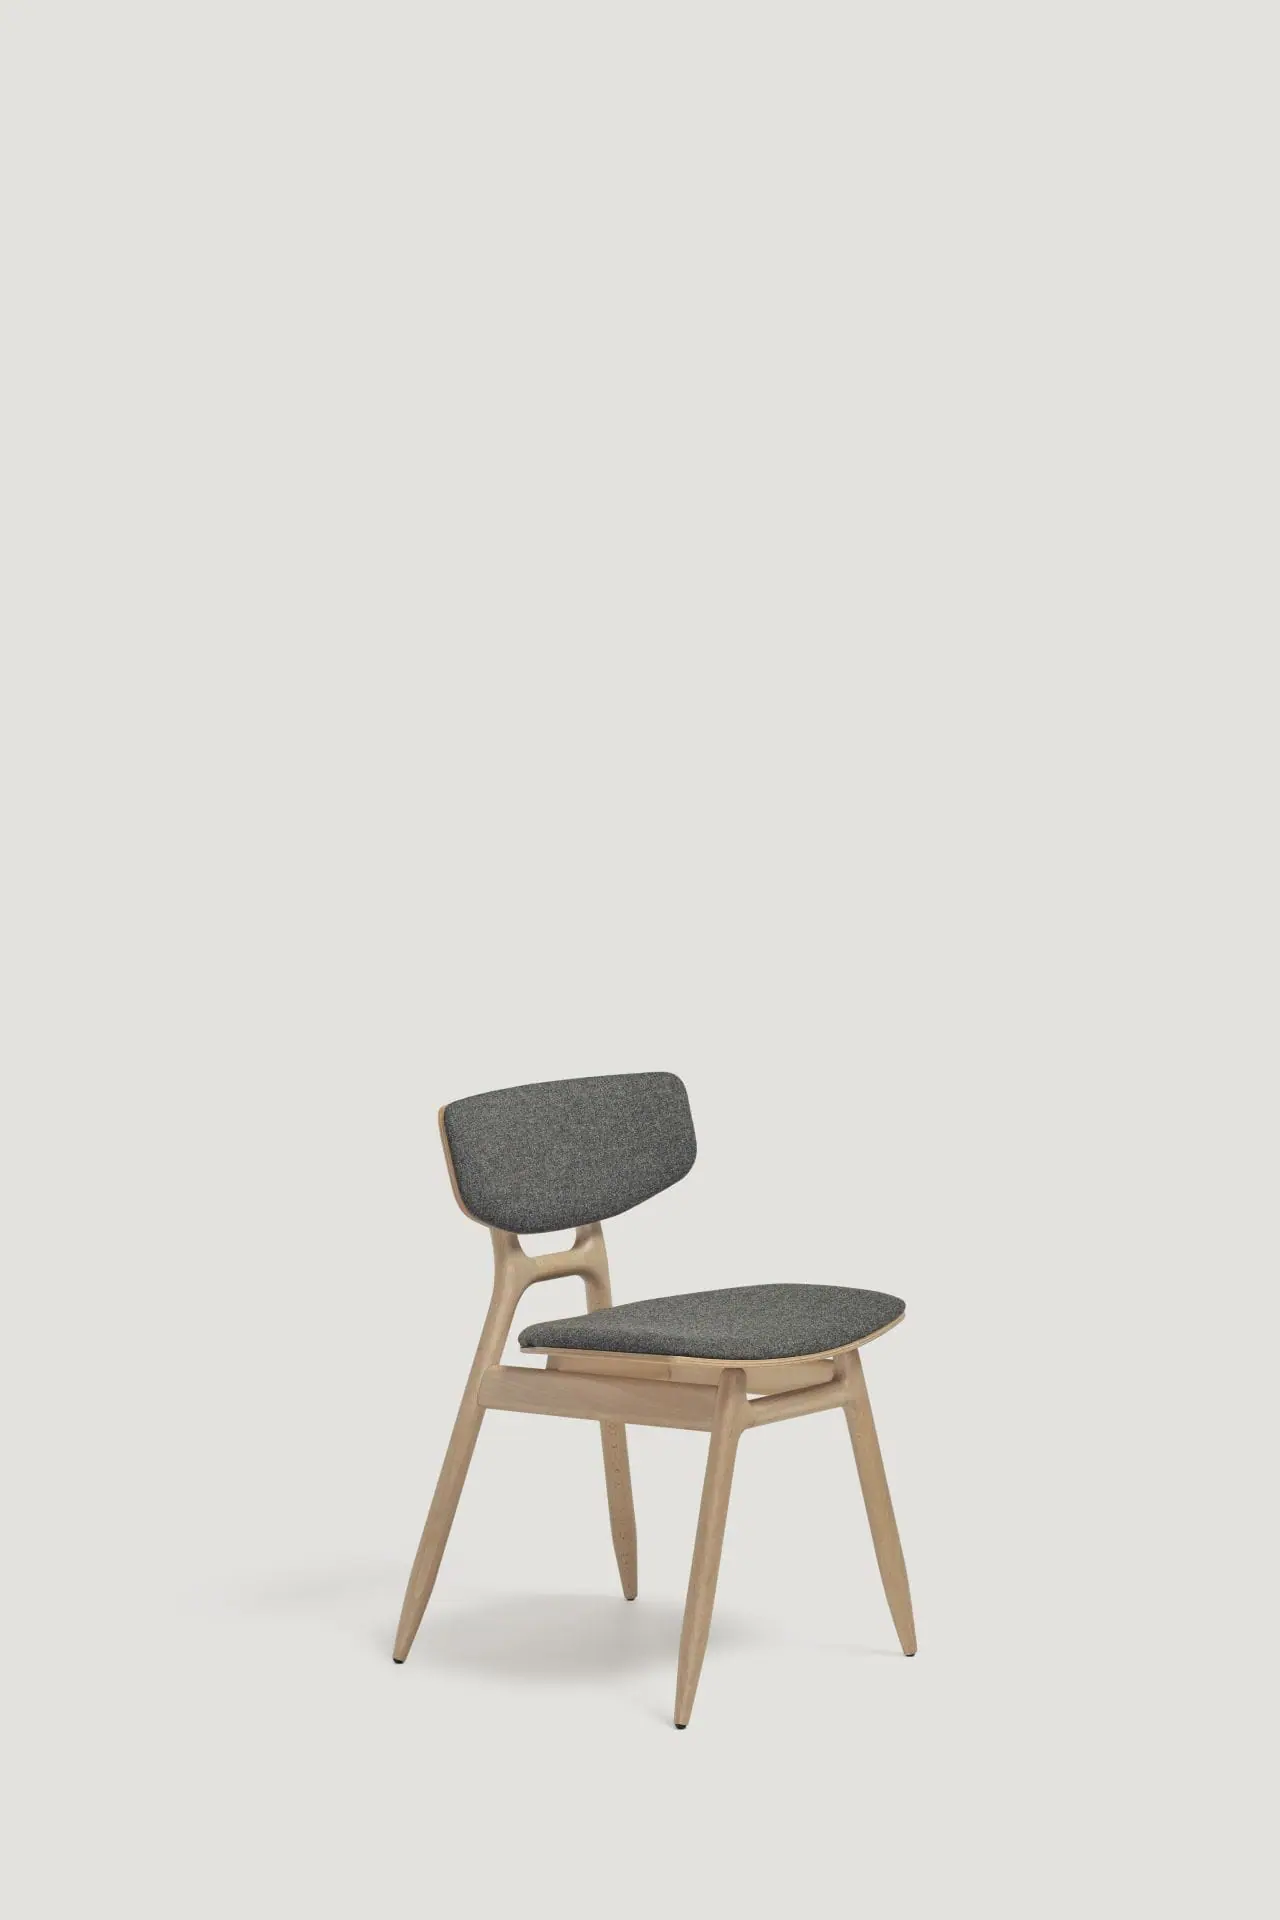 capdell-eco-chair-03